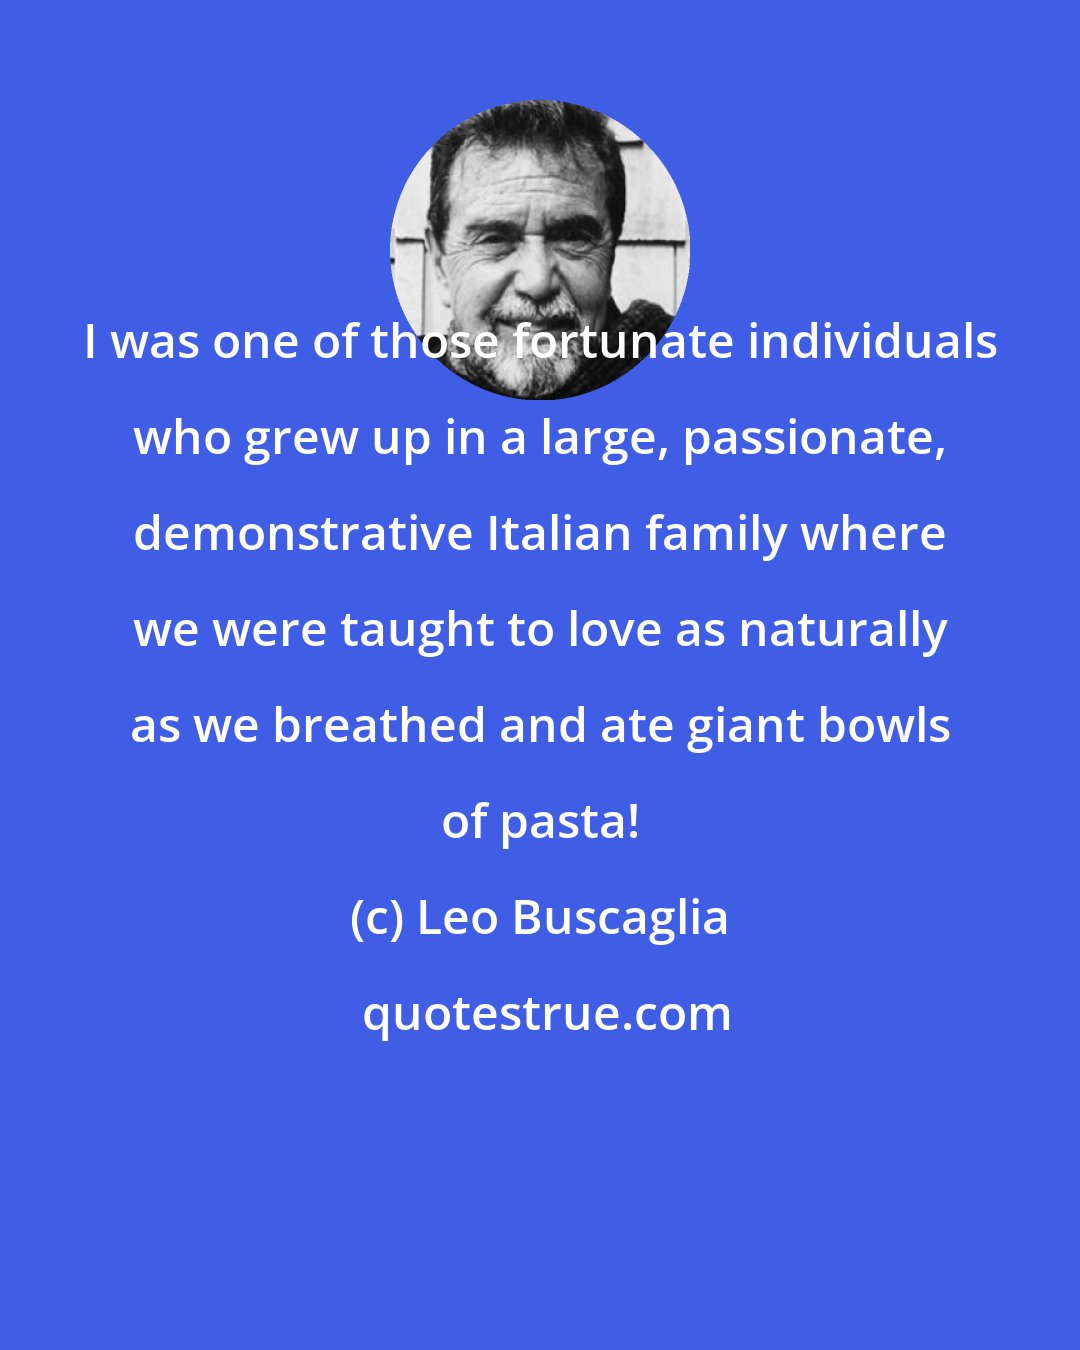 Leo Buscaglia: I was one of those fortunate individuals who grew up in a large, passionate, demonstrative Italian family where we were taught to love as naturally as we breathed and ate giant bowls of pasta!